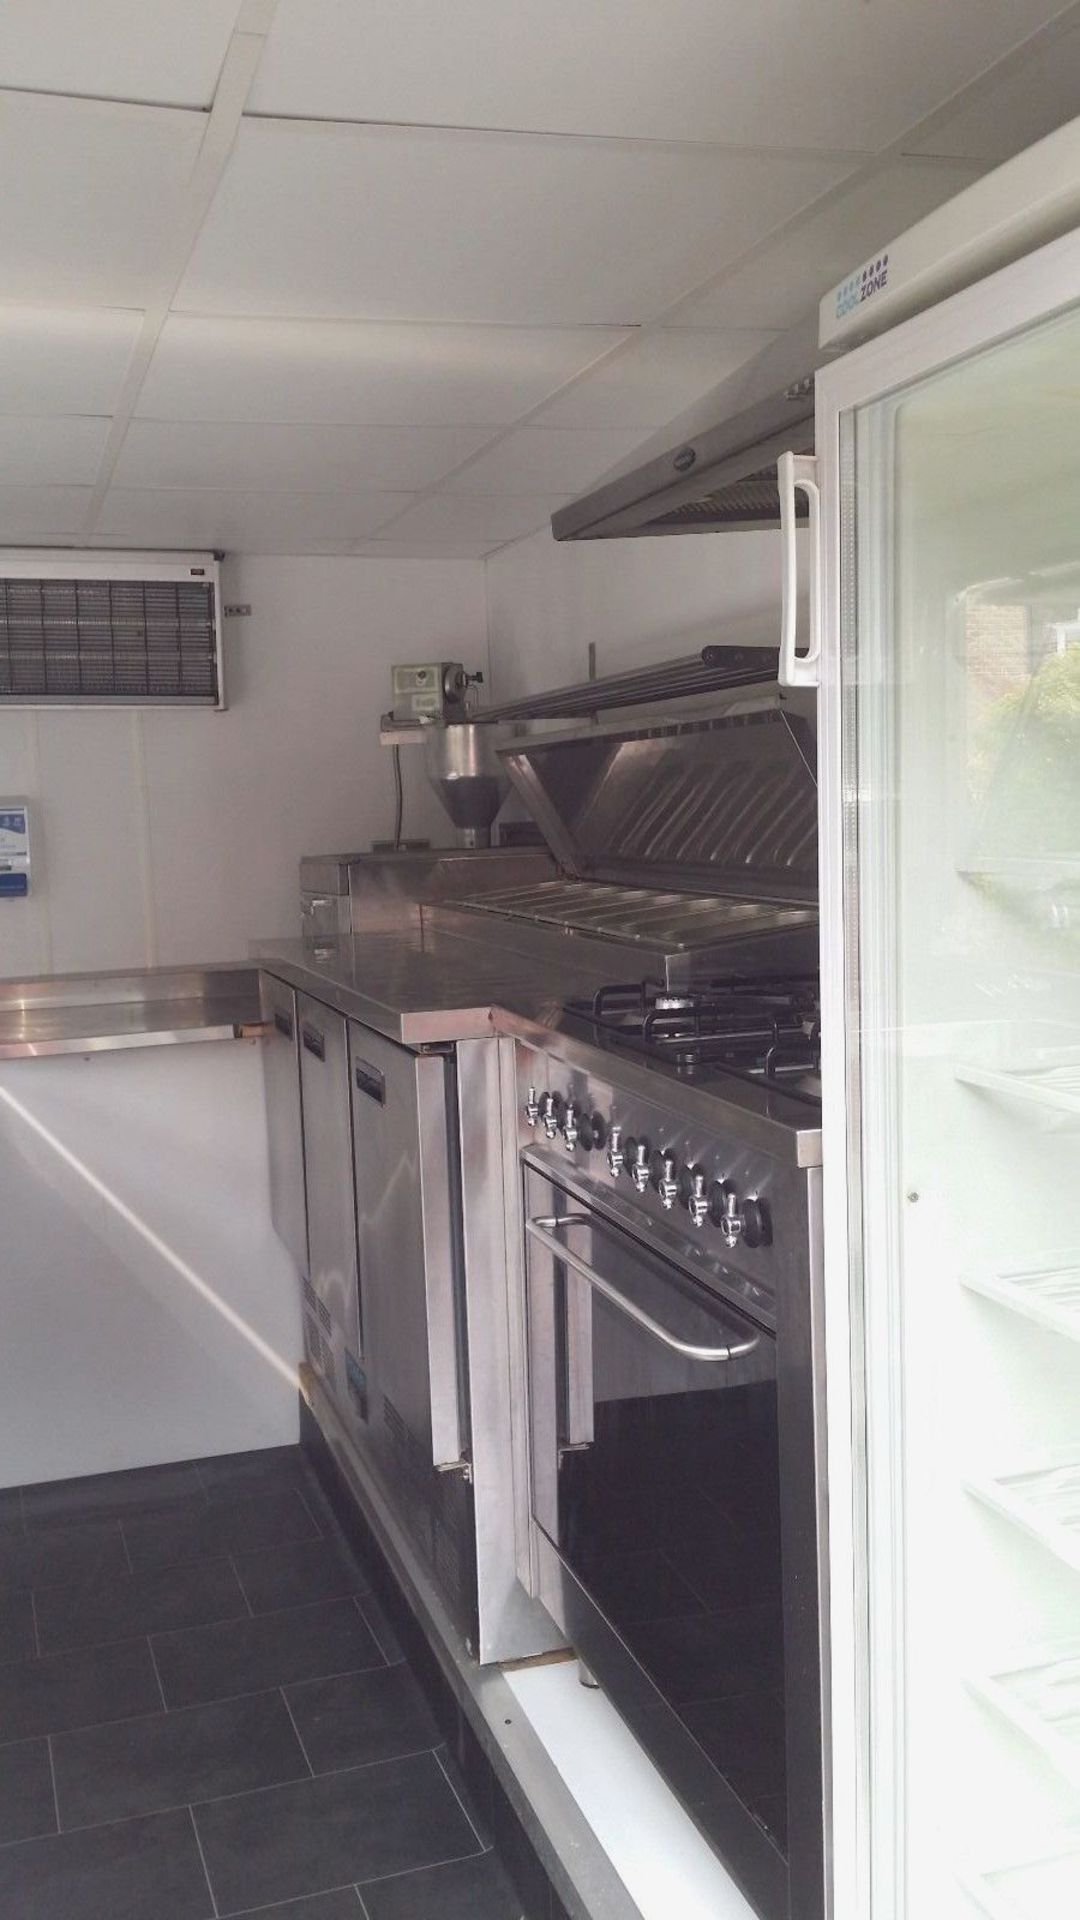 5 Star Rated A Pro Catering Unit Indespension Trailer - Bild 5 aus 7